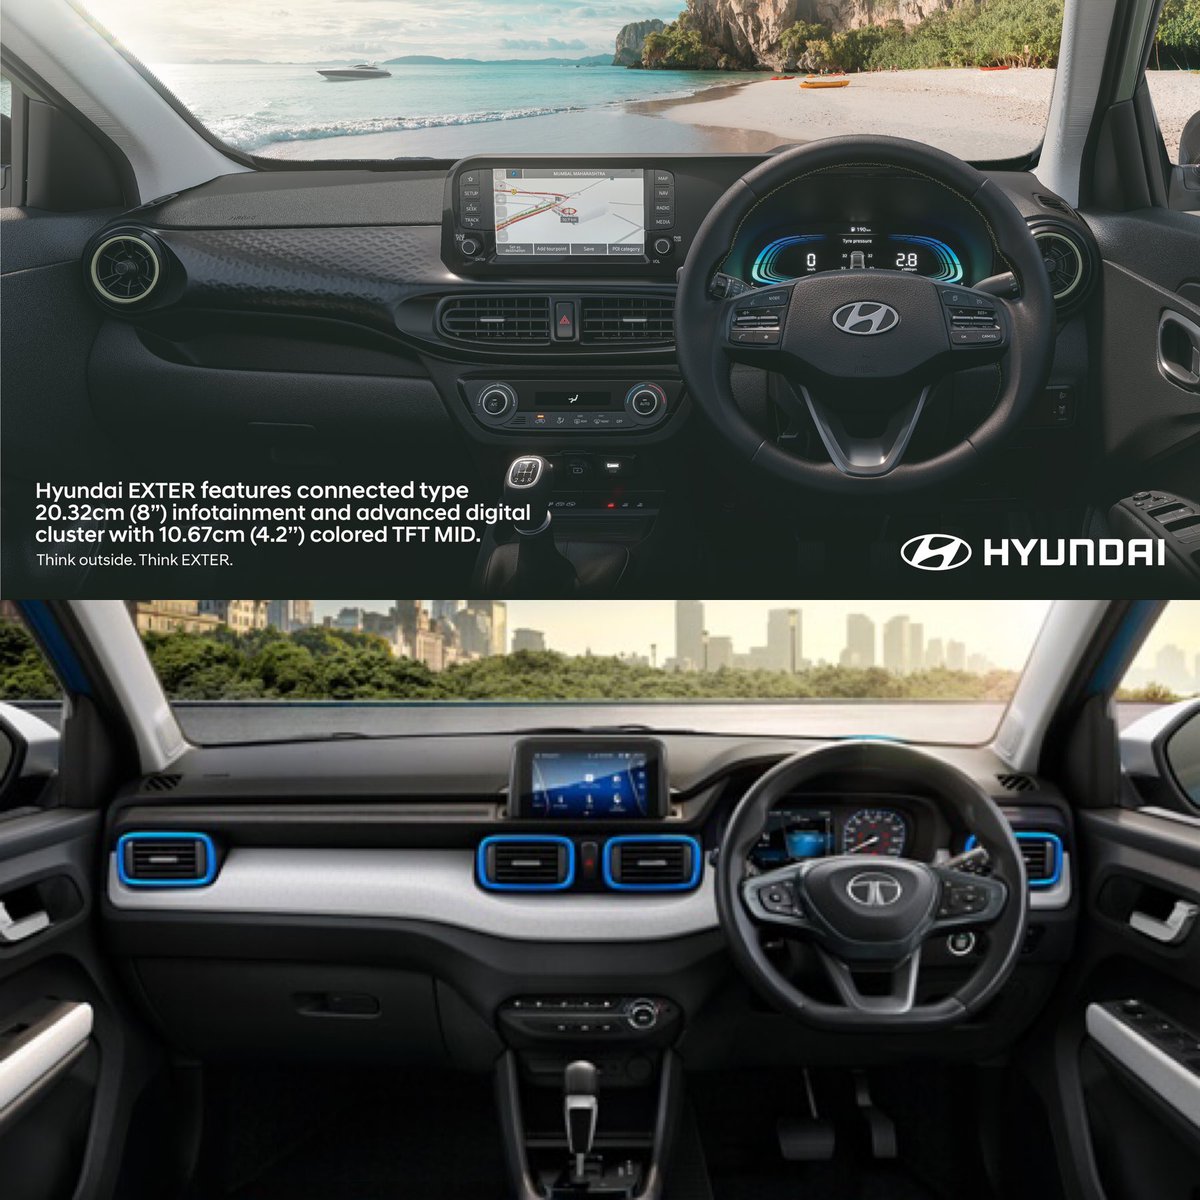 Hyundai Exter interior revealed officially. Does it look better than Tata Punch?